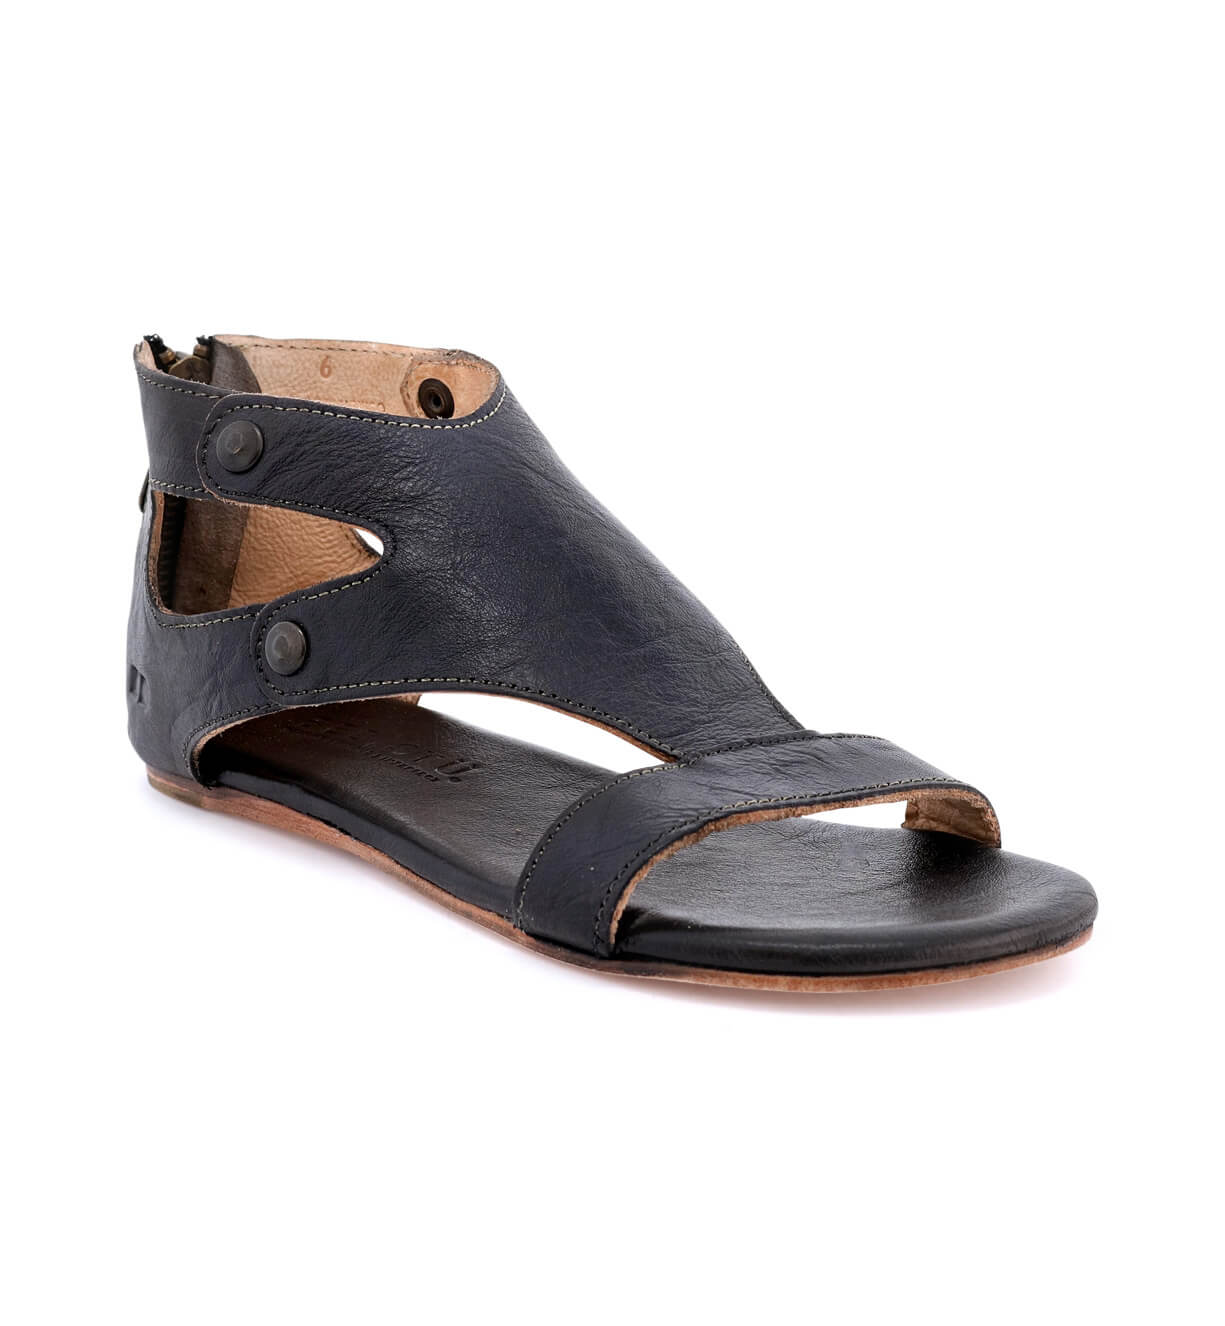 A women's black leather sandal with buckles and straps called the Soto by Bed Stu.